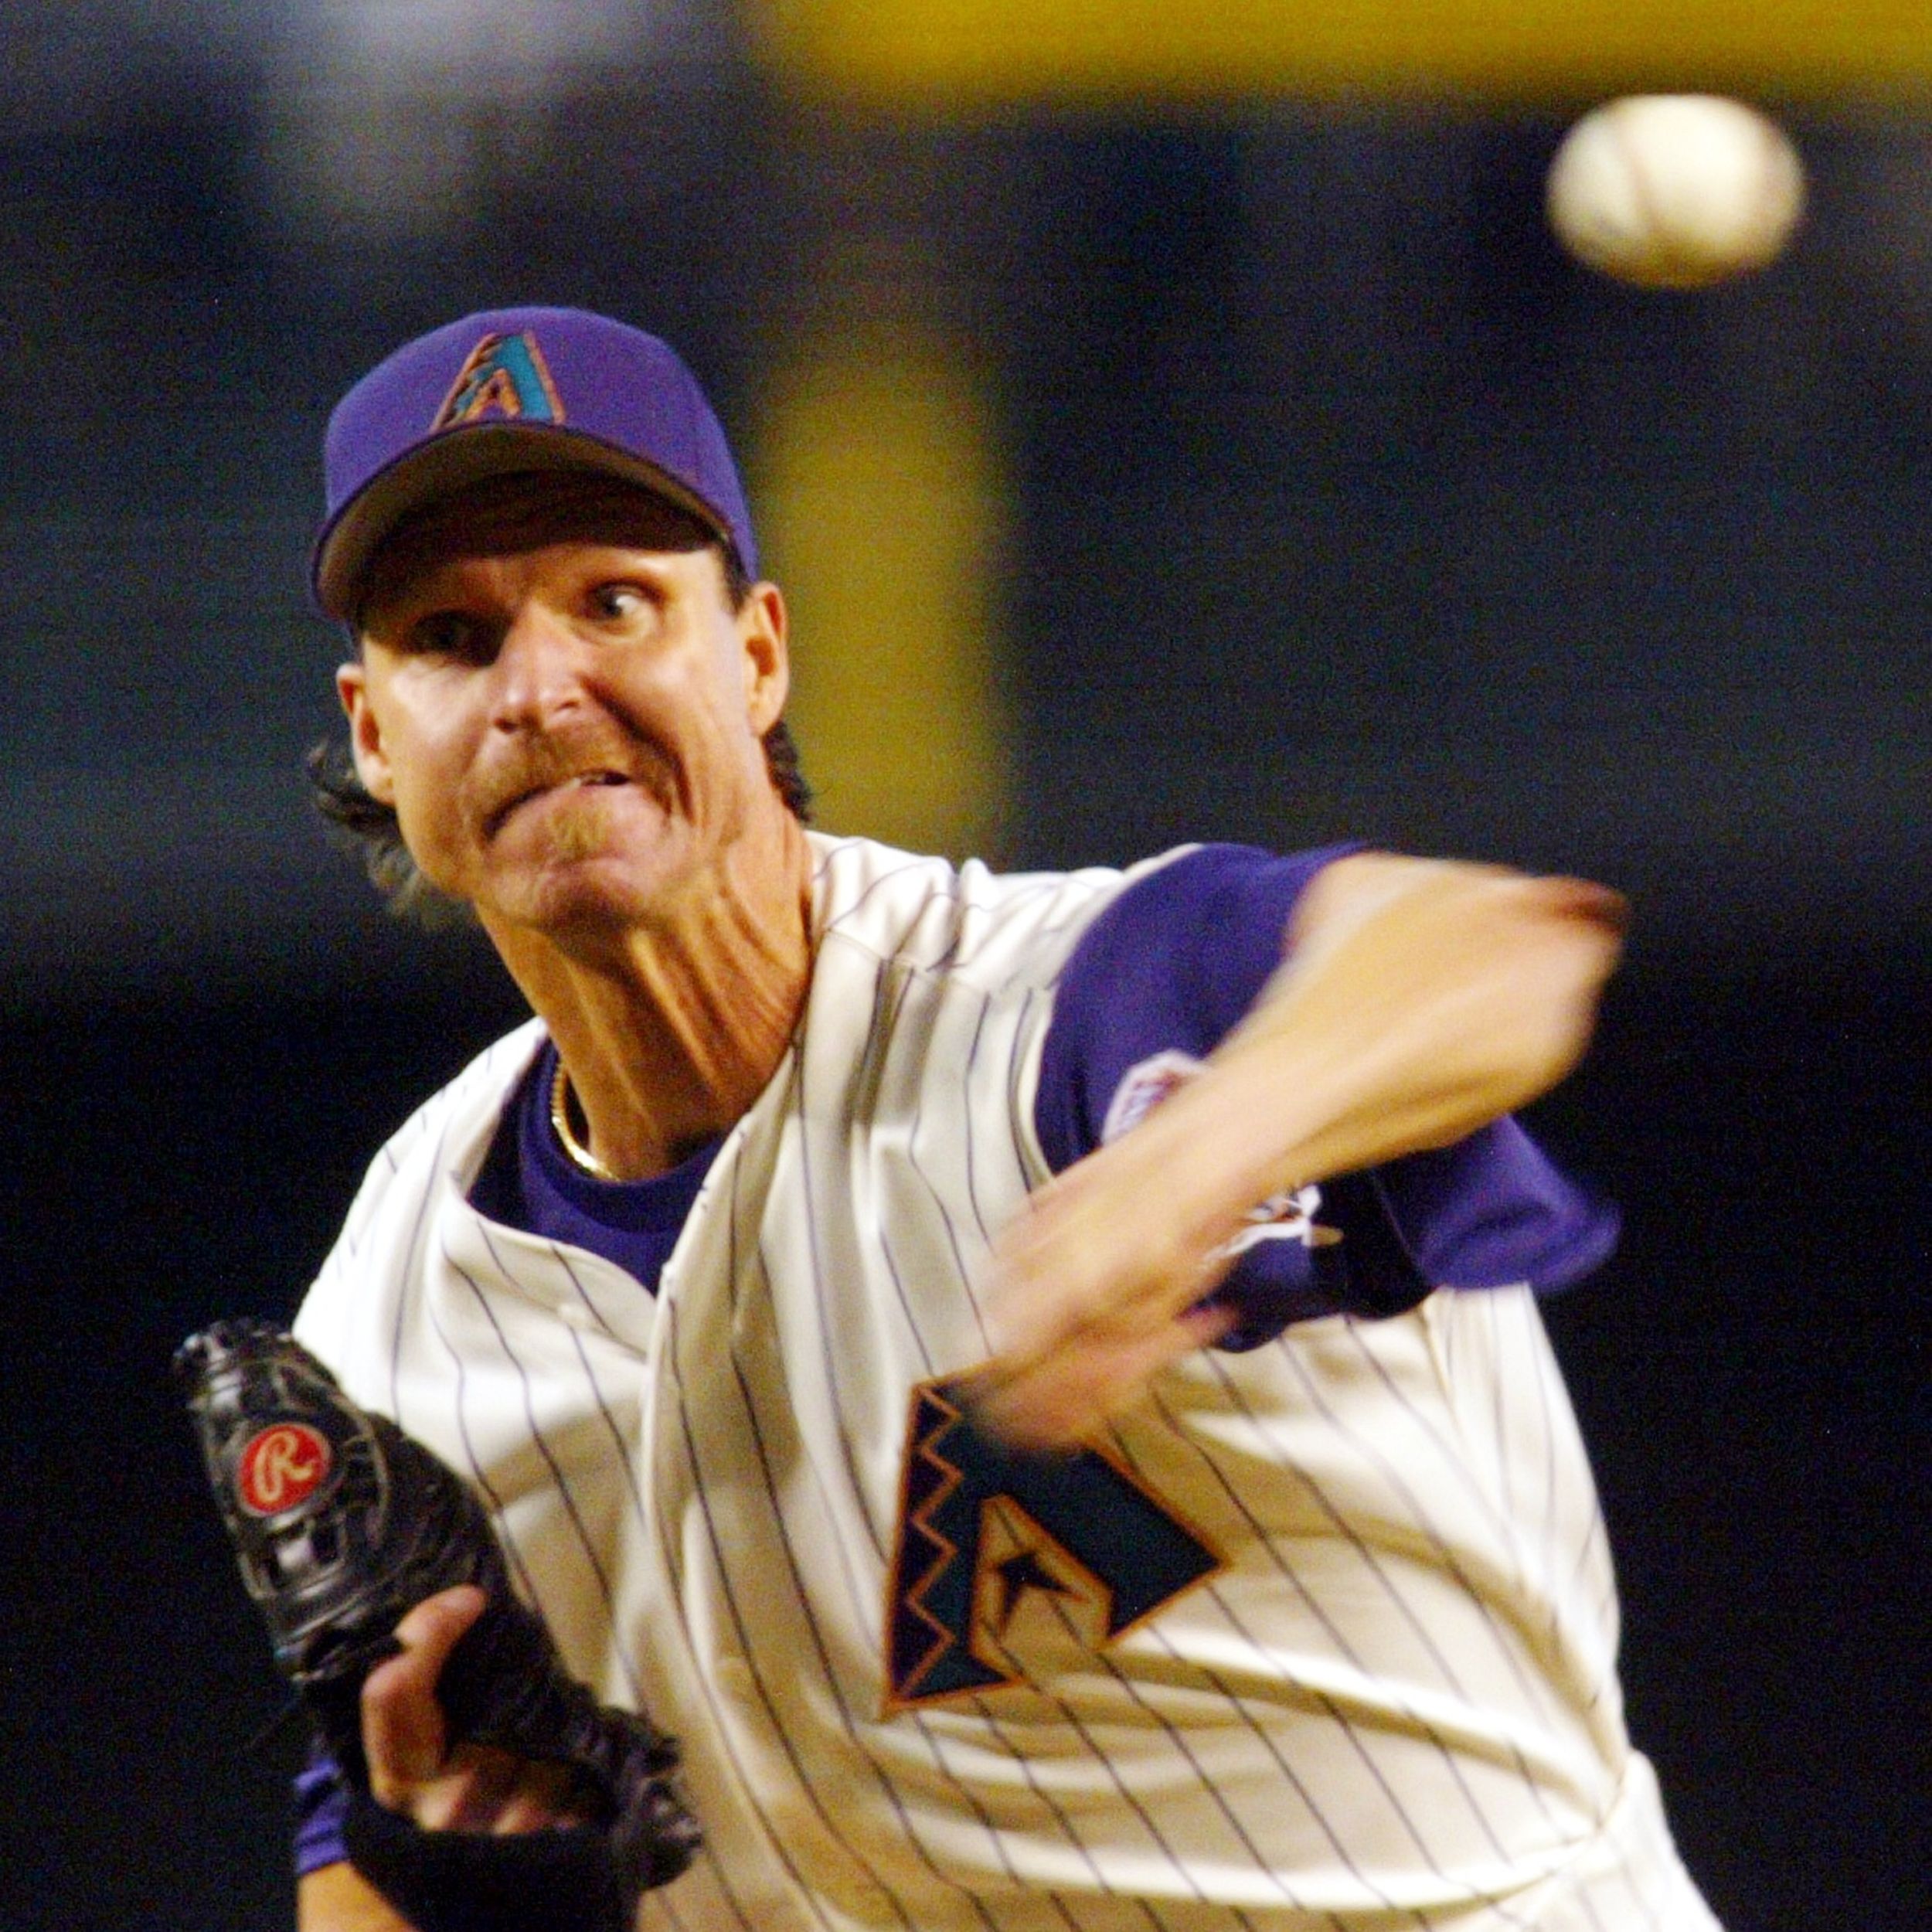 May 18, 2004: Randy Johnson pitches a perfect game